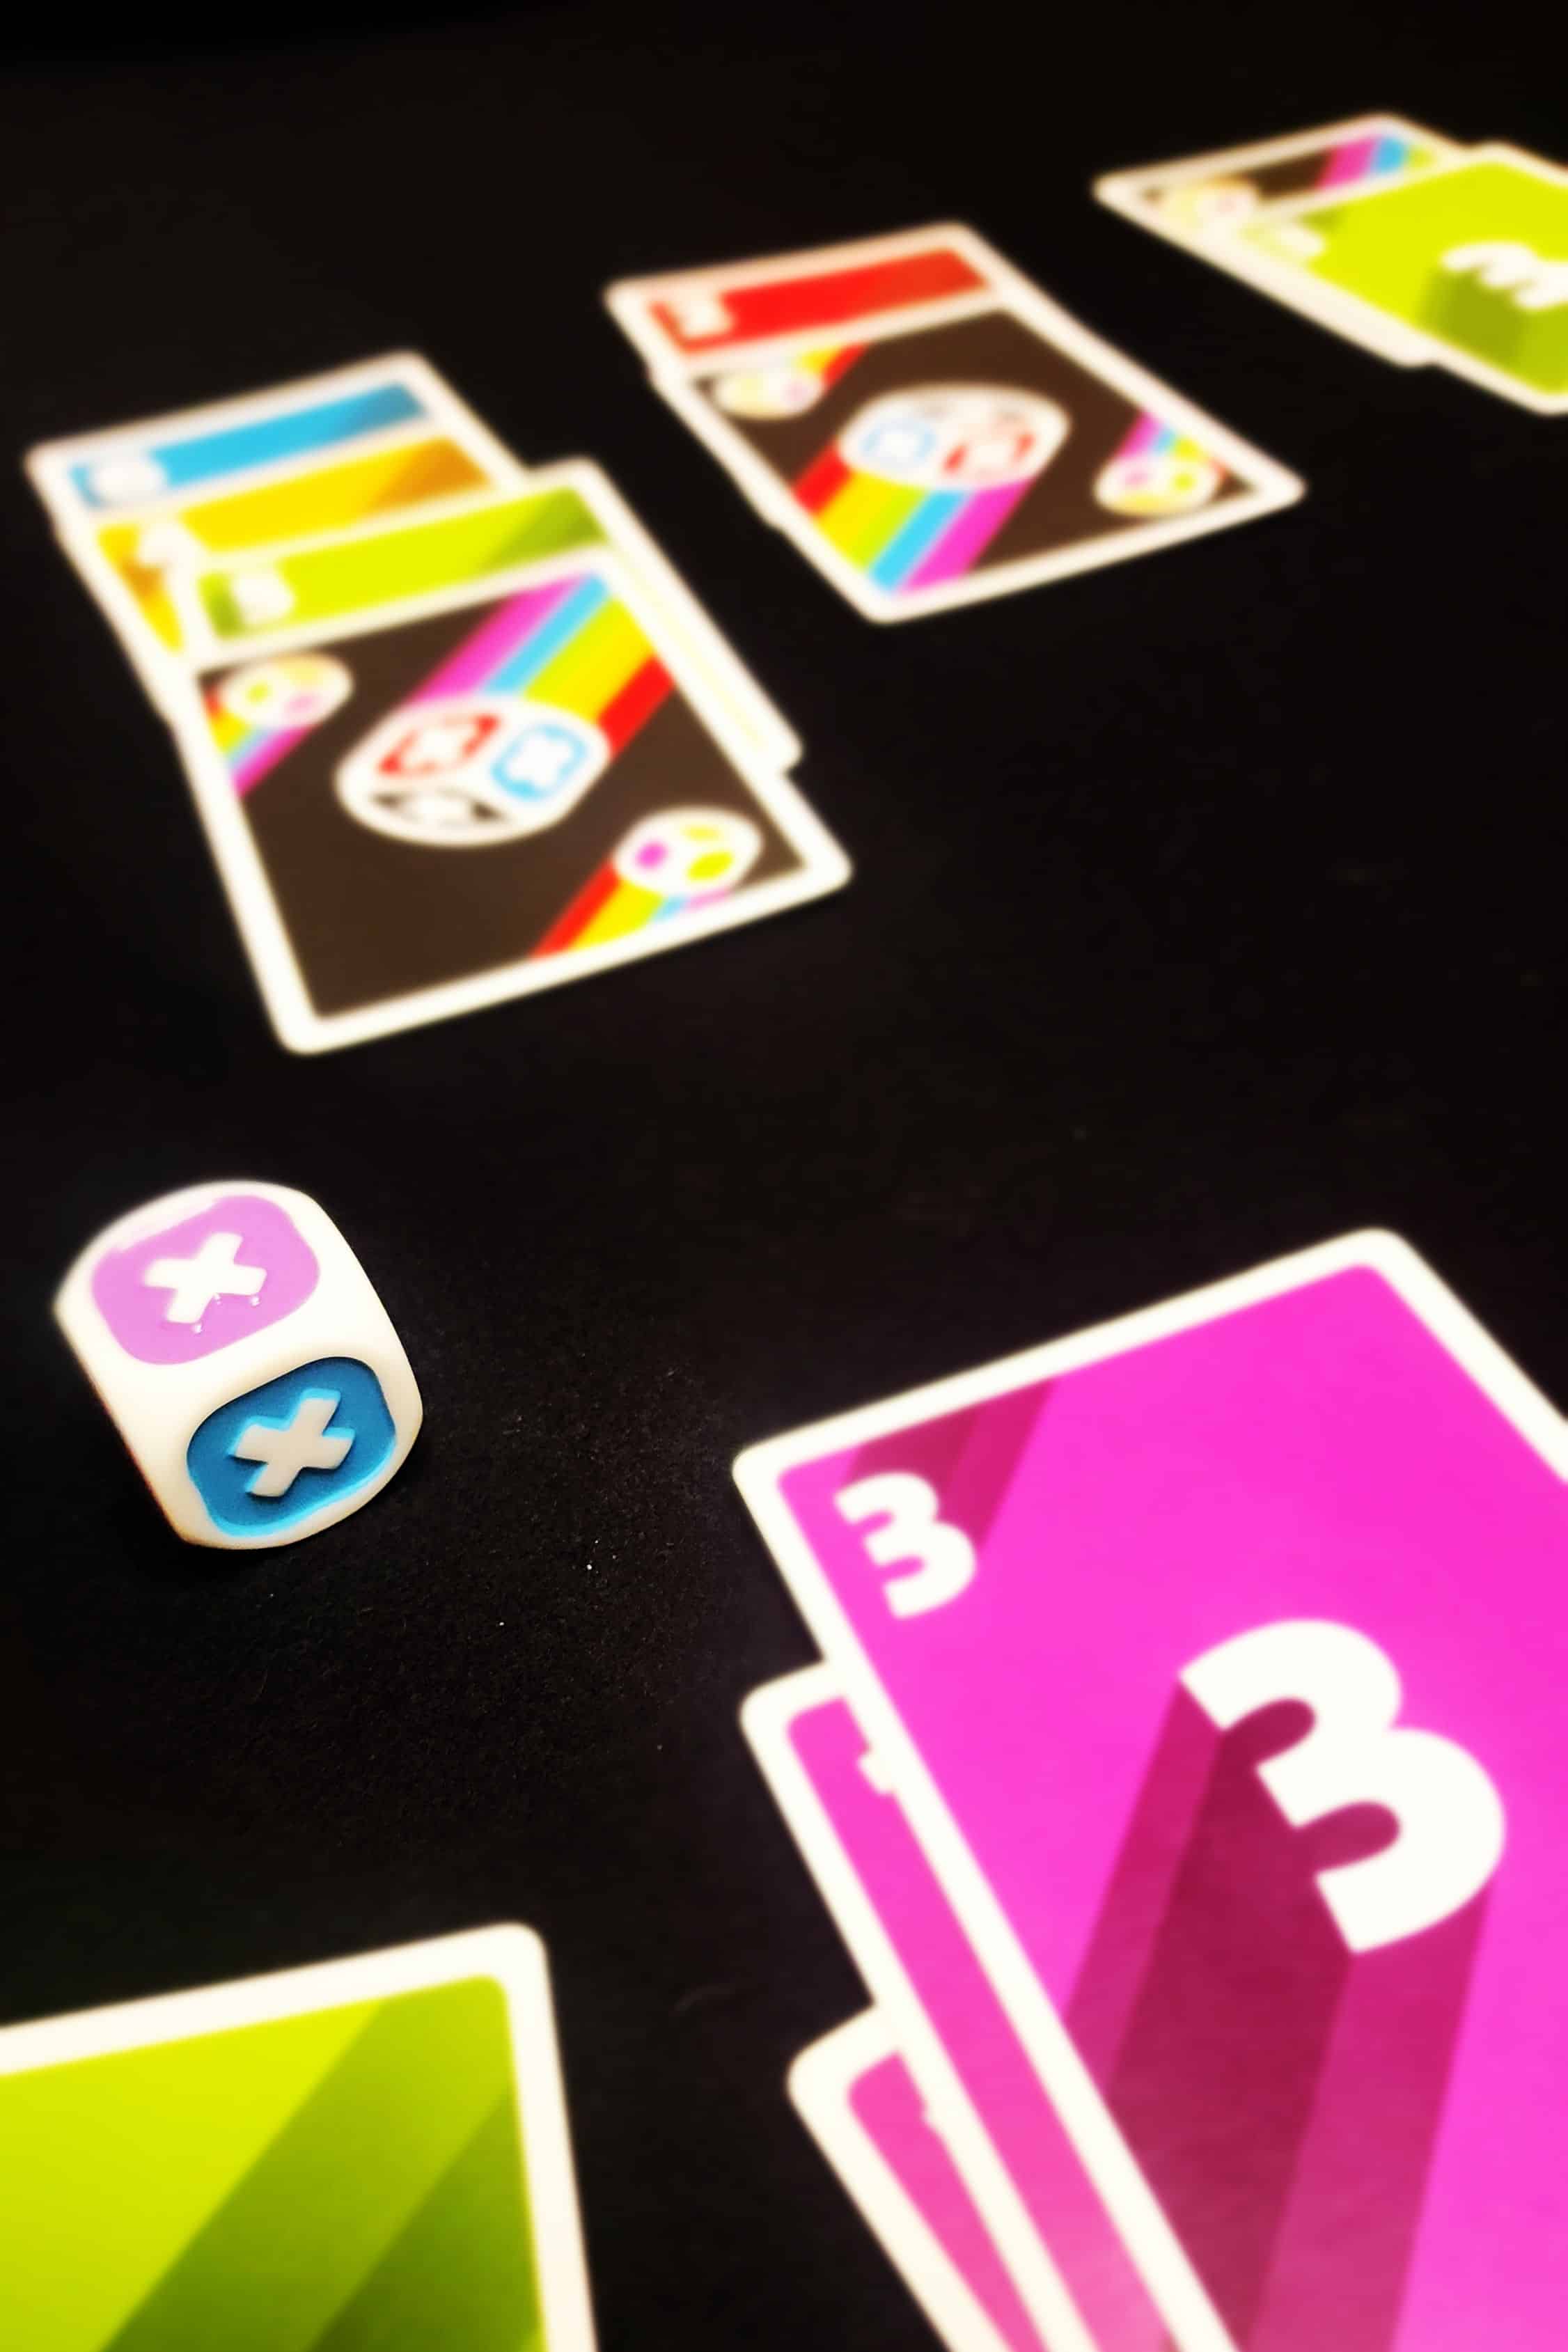 We love us a good quick to learn tabletop game at family game night! Test your luck with this easy family card game! via @crisgoode